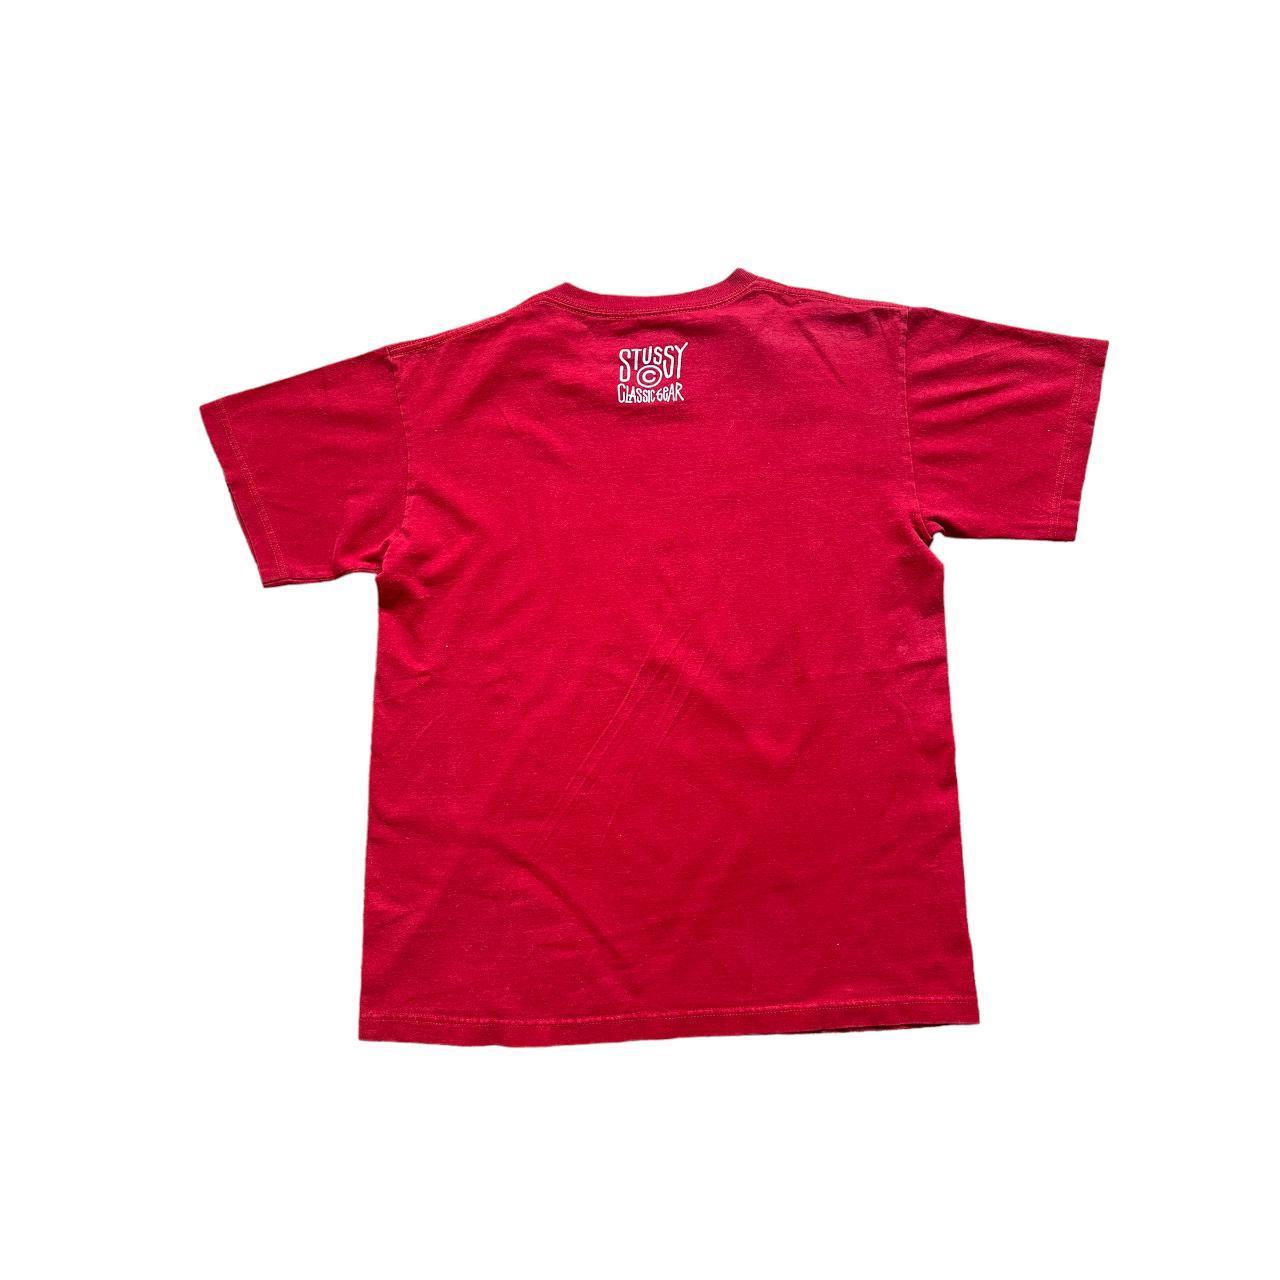 Stussy Logo red T-shirt - Known Source